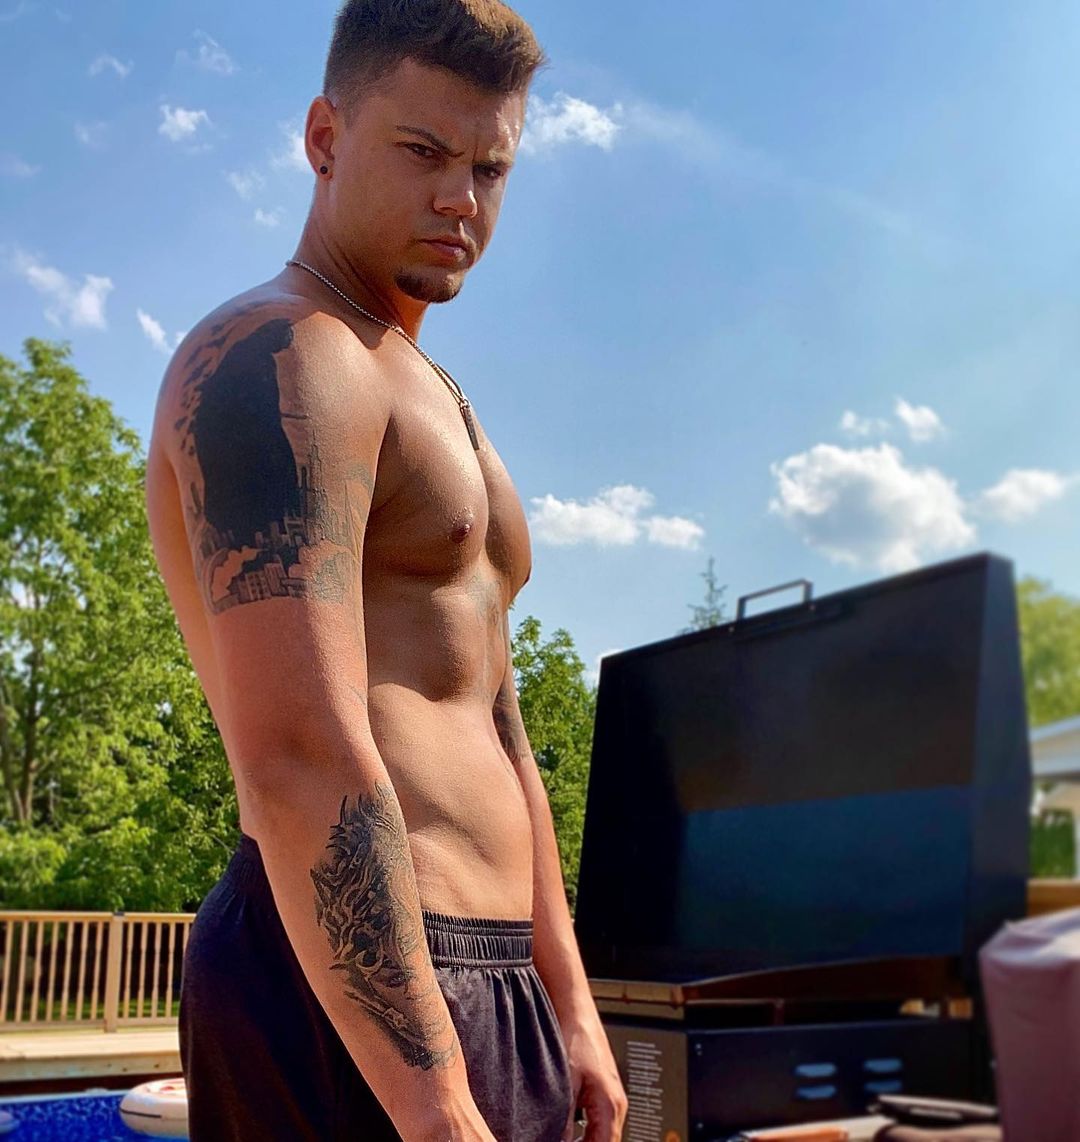 See Teen Mom’s buffest dads featuring Tyler Baltierra, Cory Wharton and Cole DeBoer as reality stars hit the gym